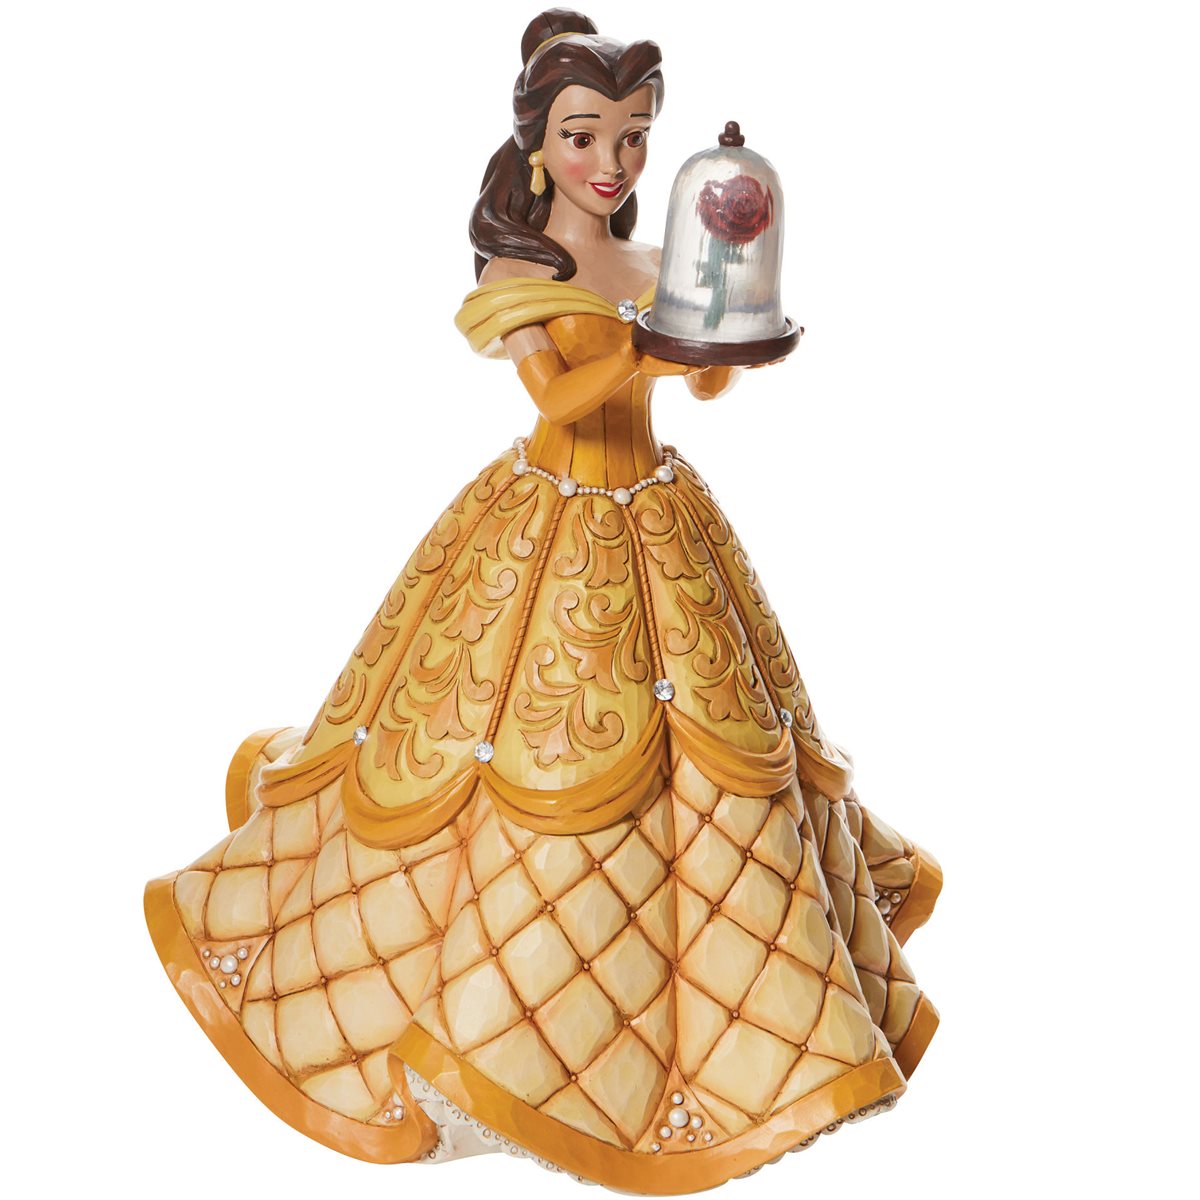 Beauty and The Beast: Belle MC-057 Master Craft Statue